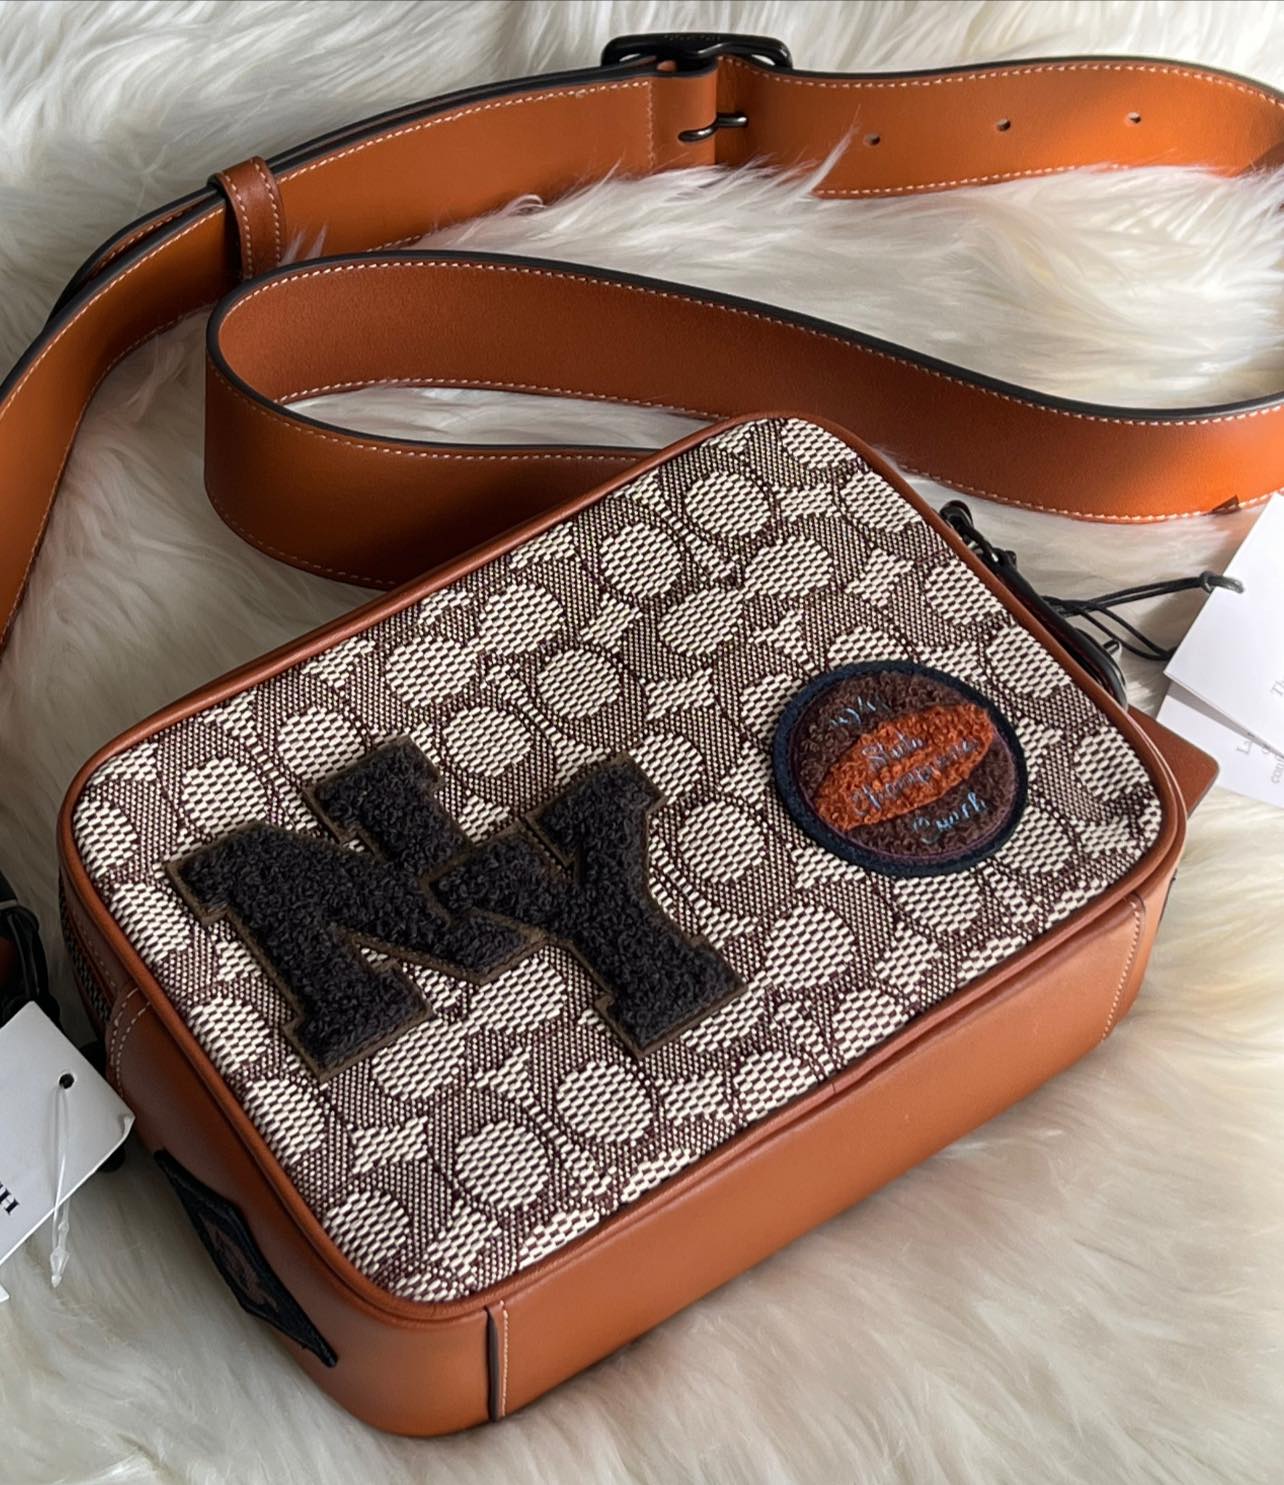 Coach Flight Bag 19 in Signature Textile Jacquard with Varsity Patches